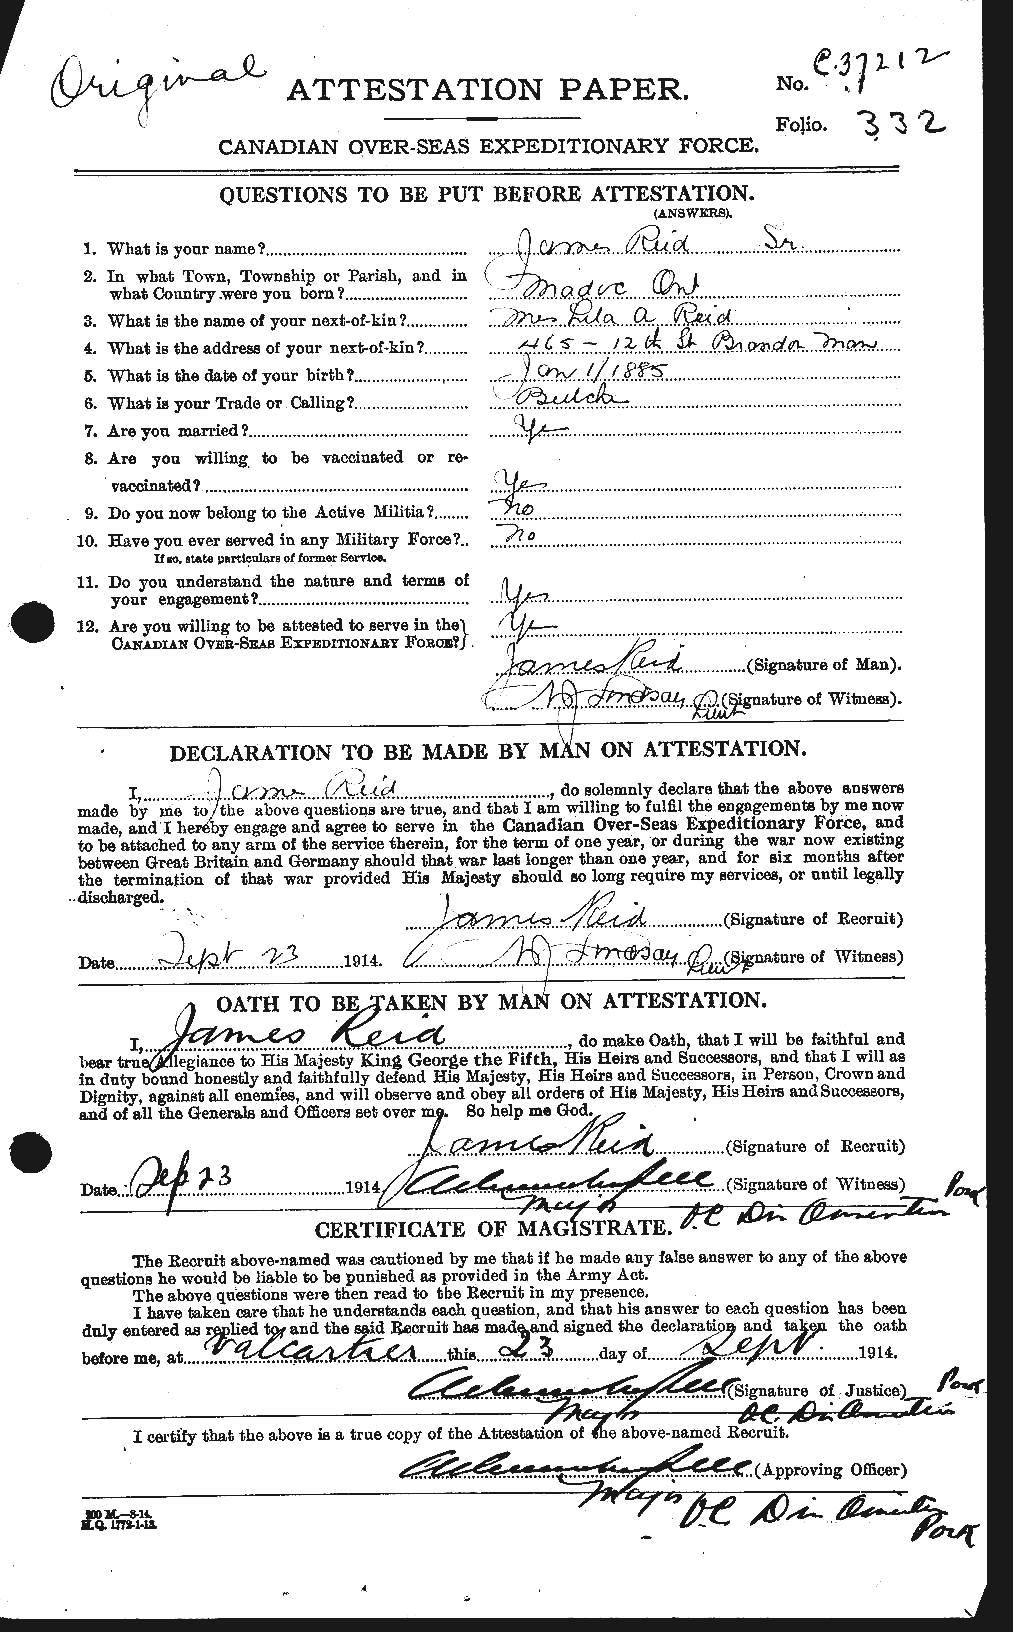 Personnel Records of the First World War - CEF 598666a